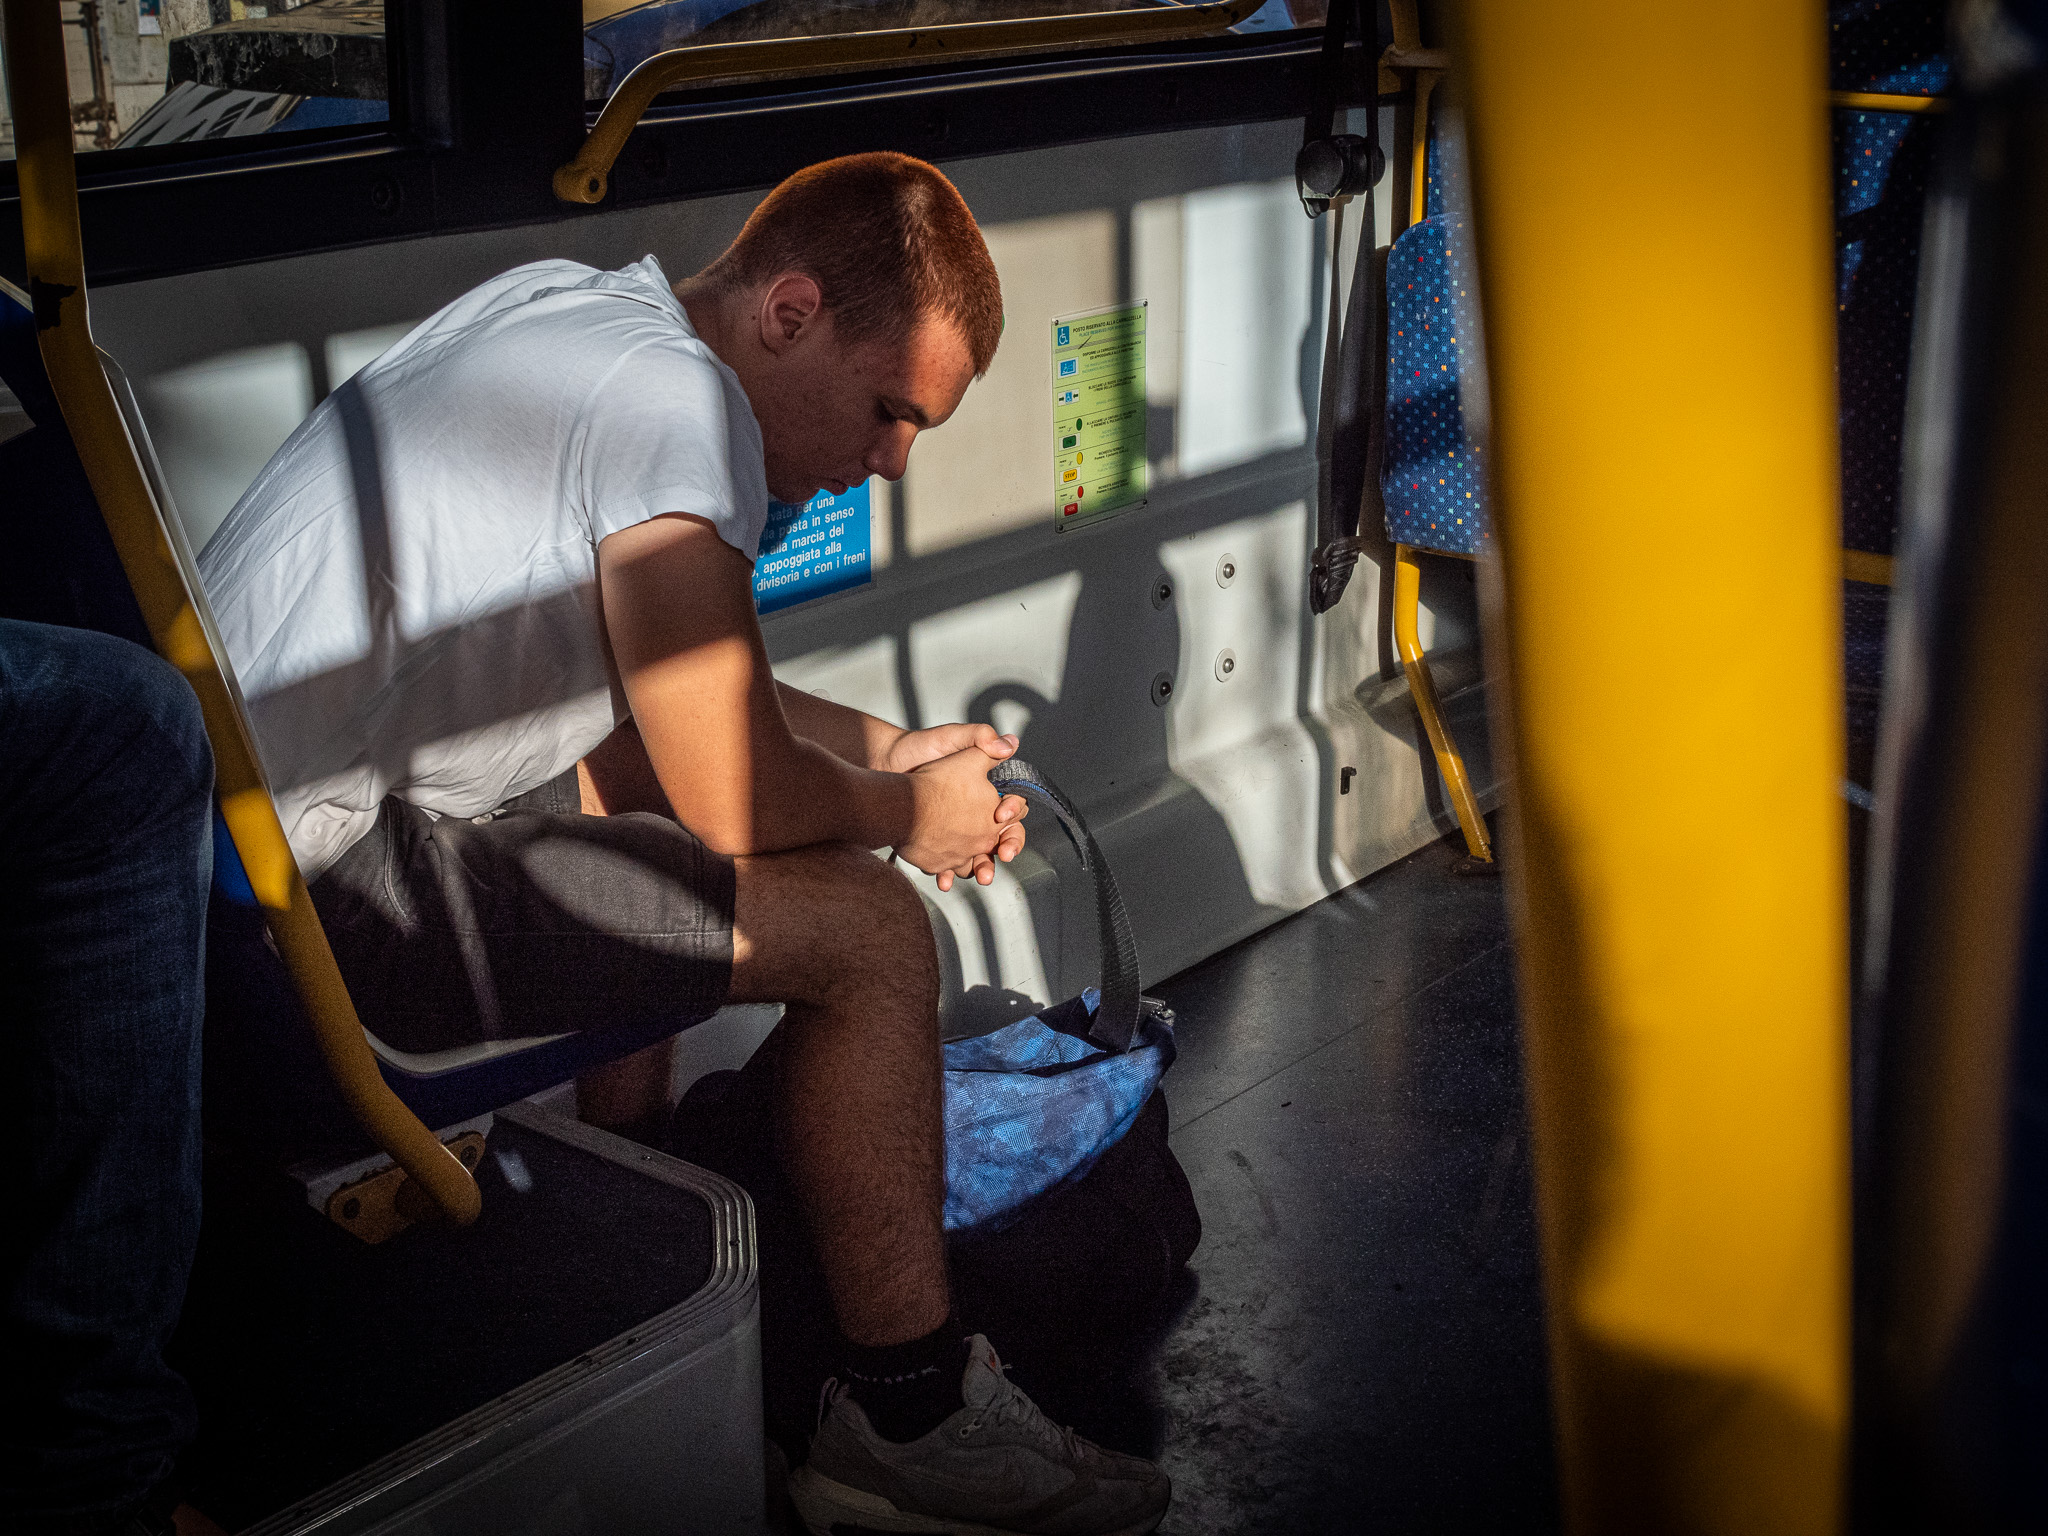 Colorful street photo of a passenger sitting in a bus